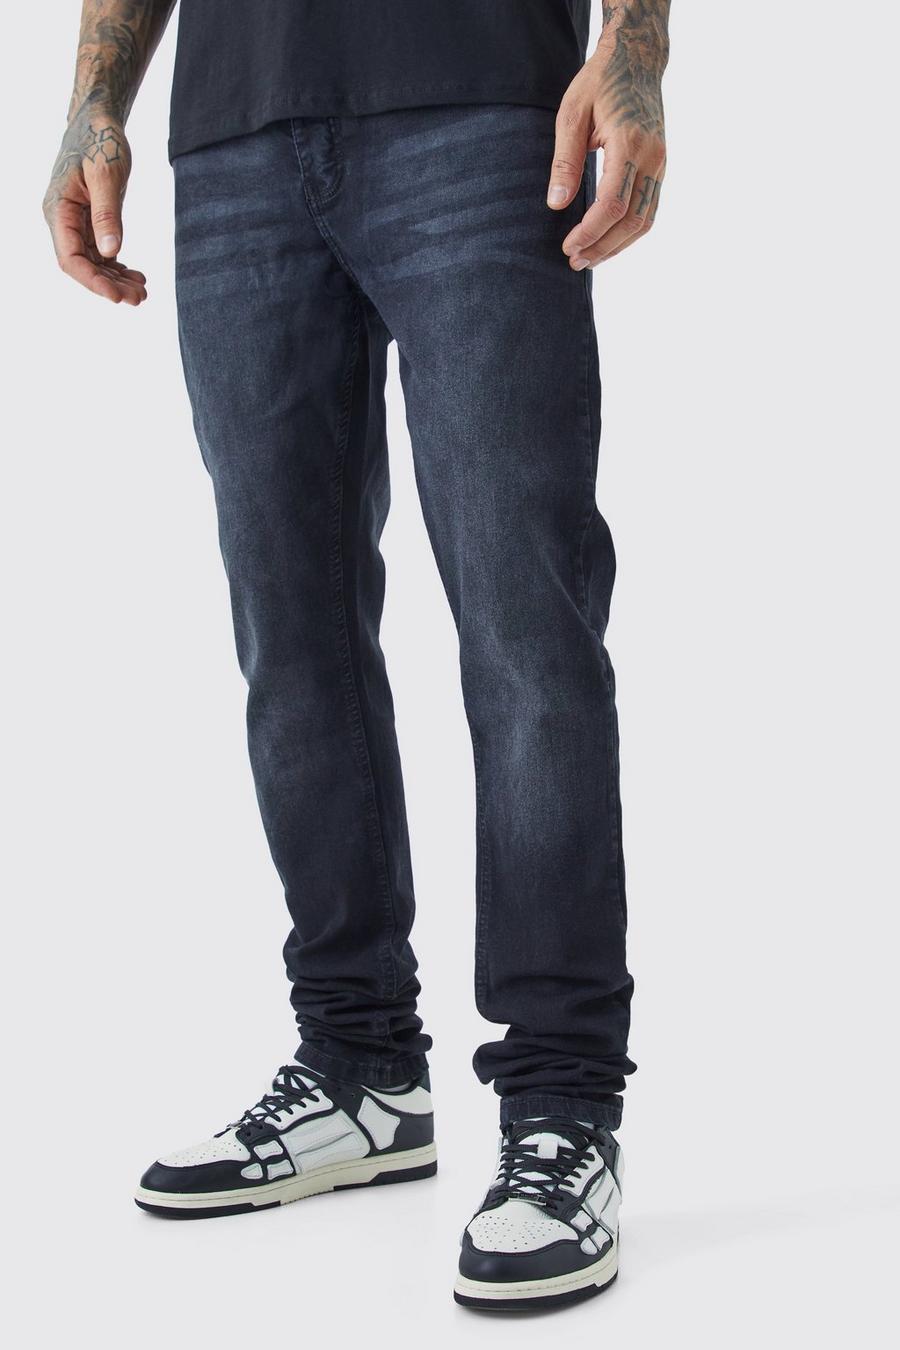 Washed black Tall Skinny Stretch Stacked Jeans